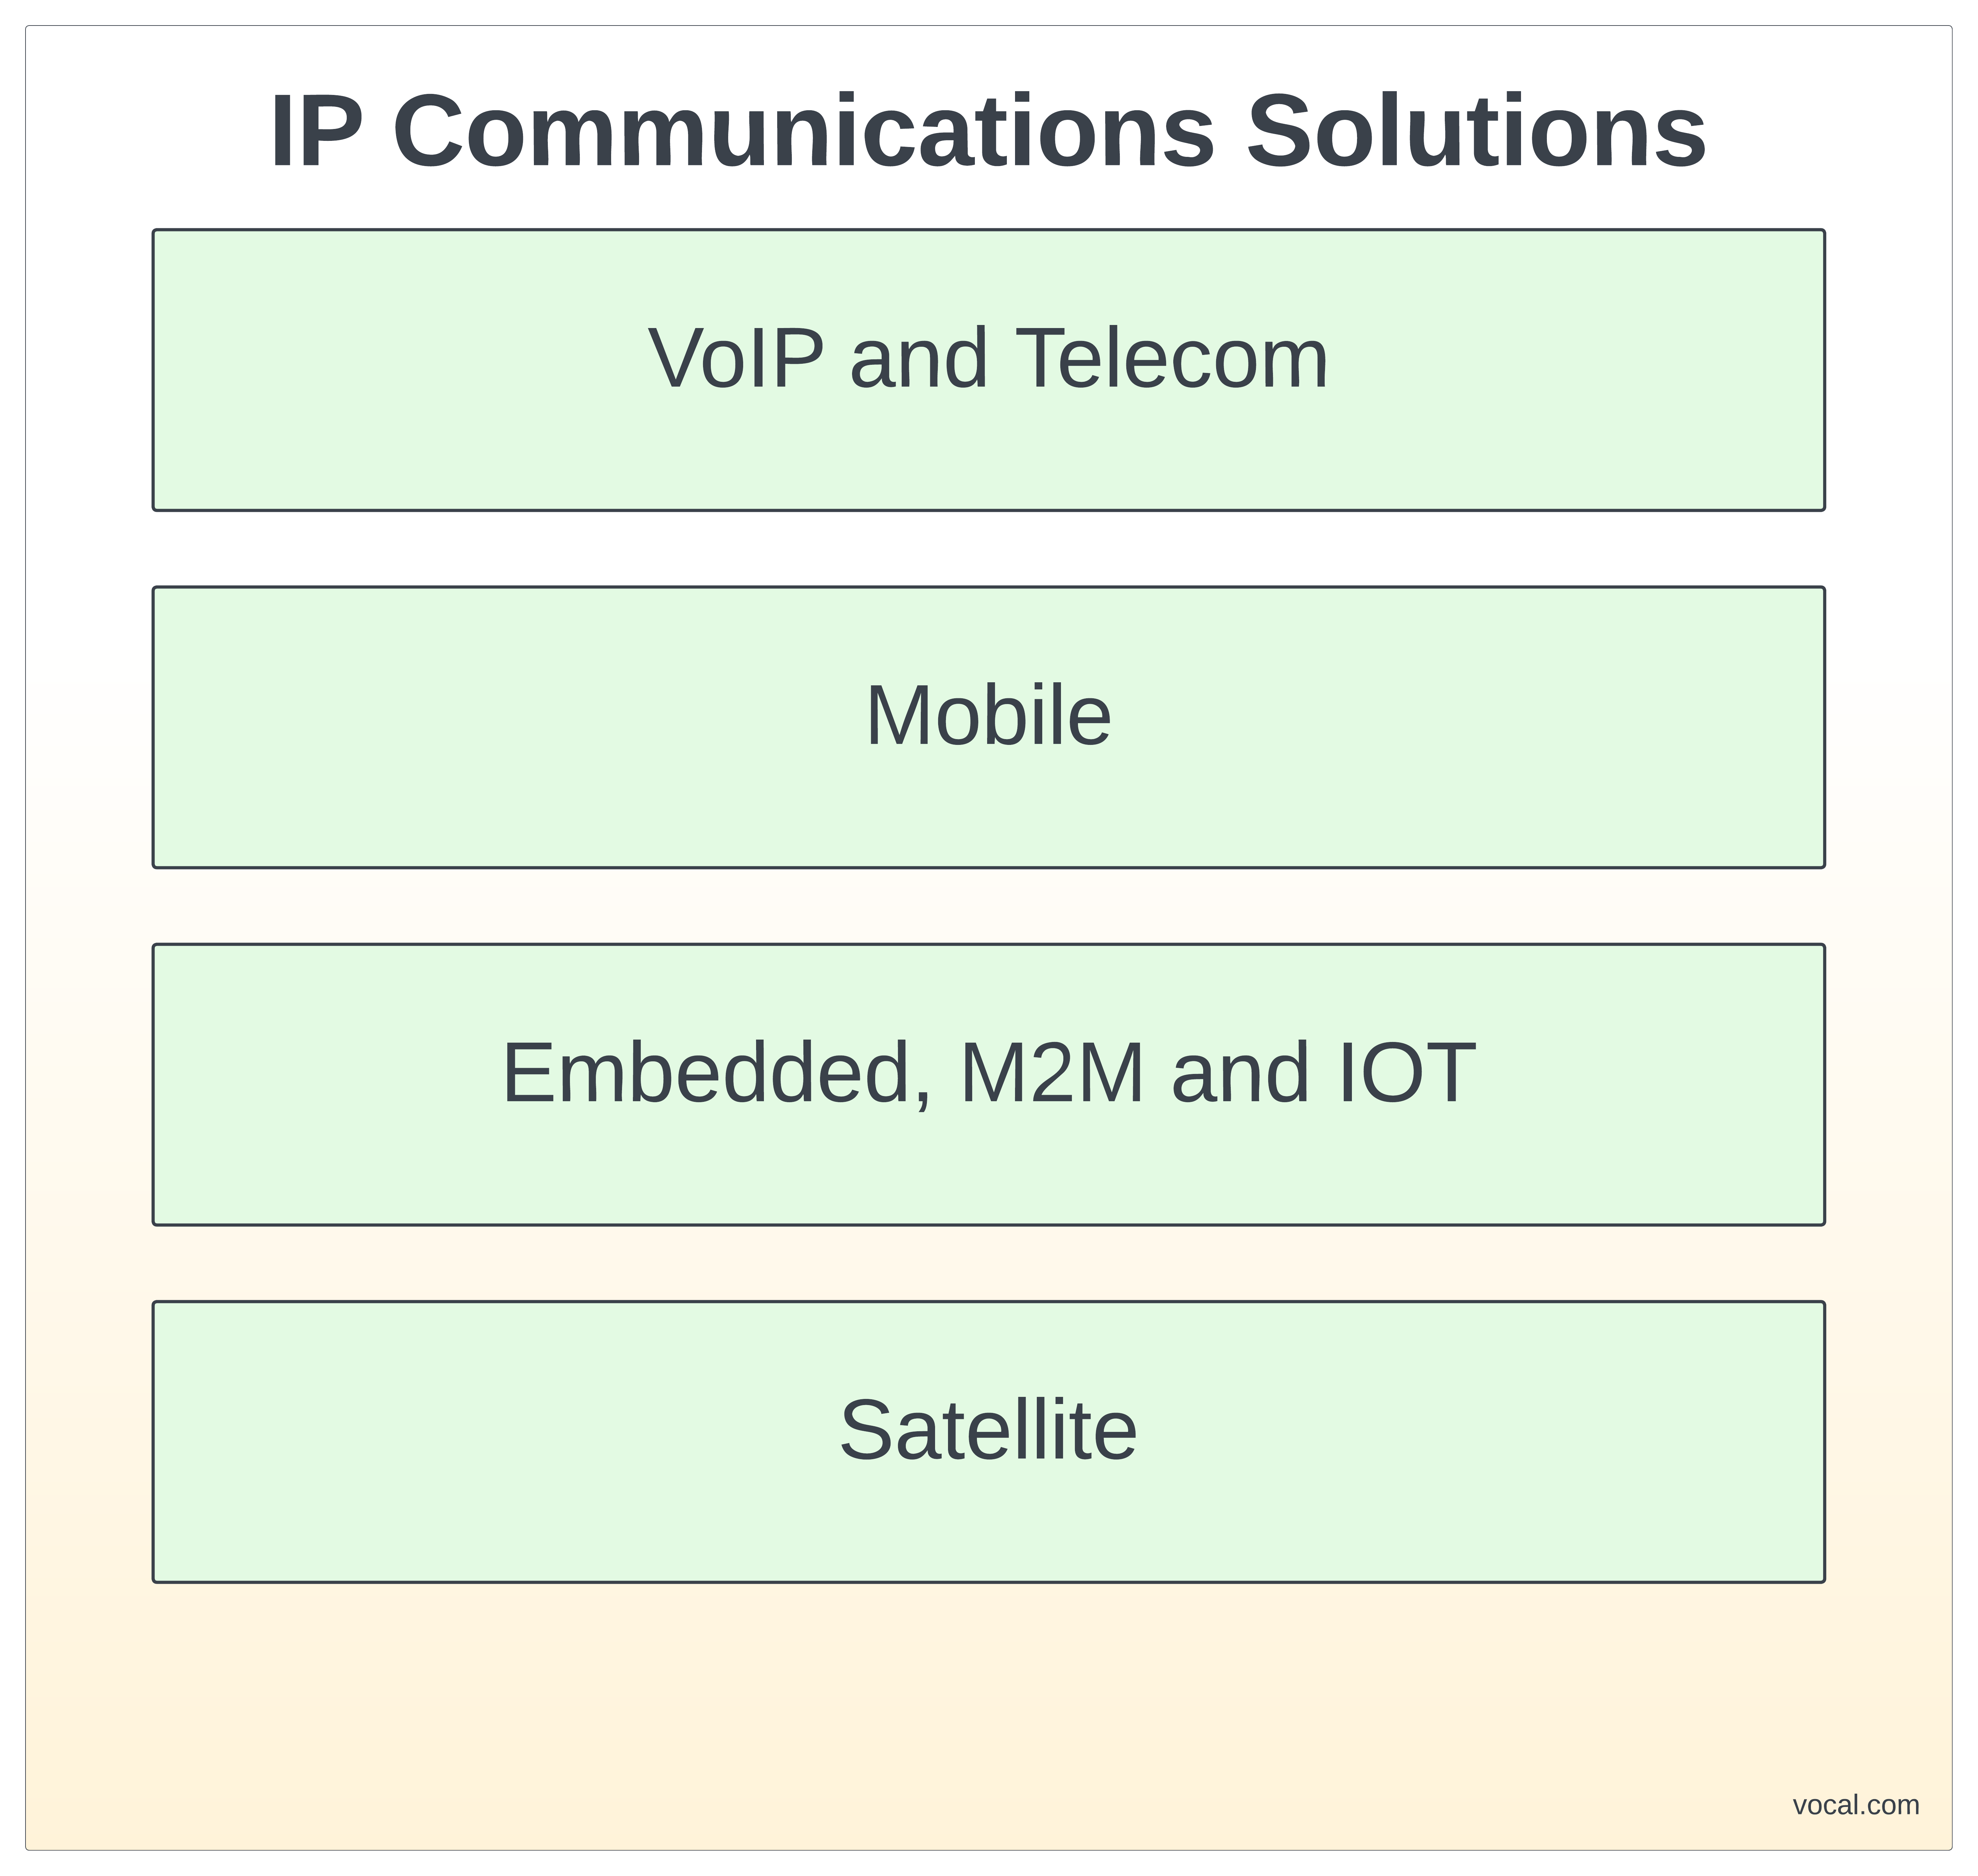 IP Communications Solutions